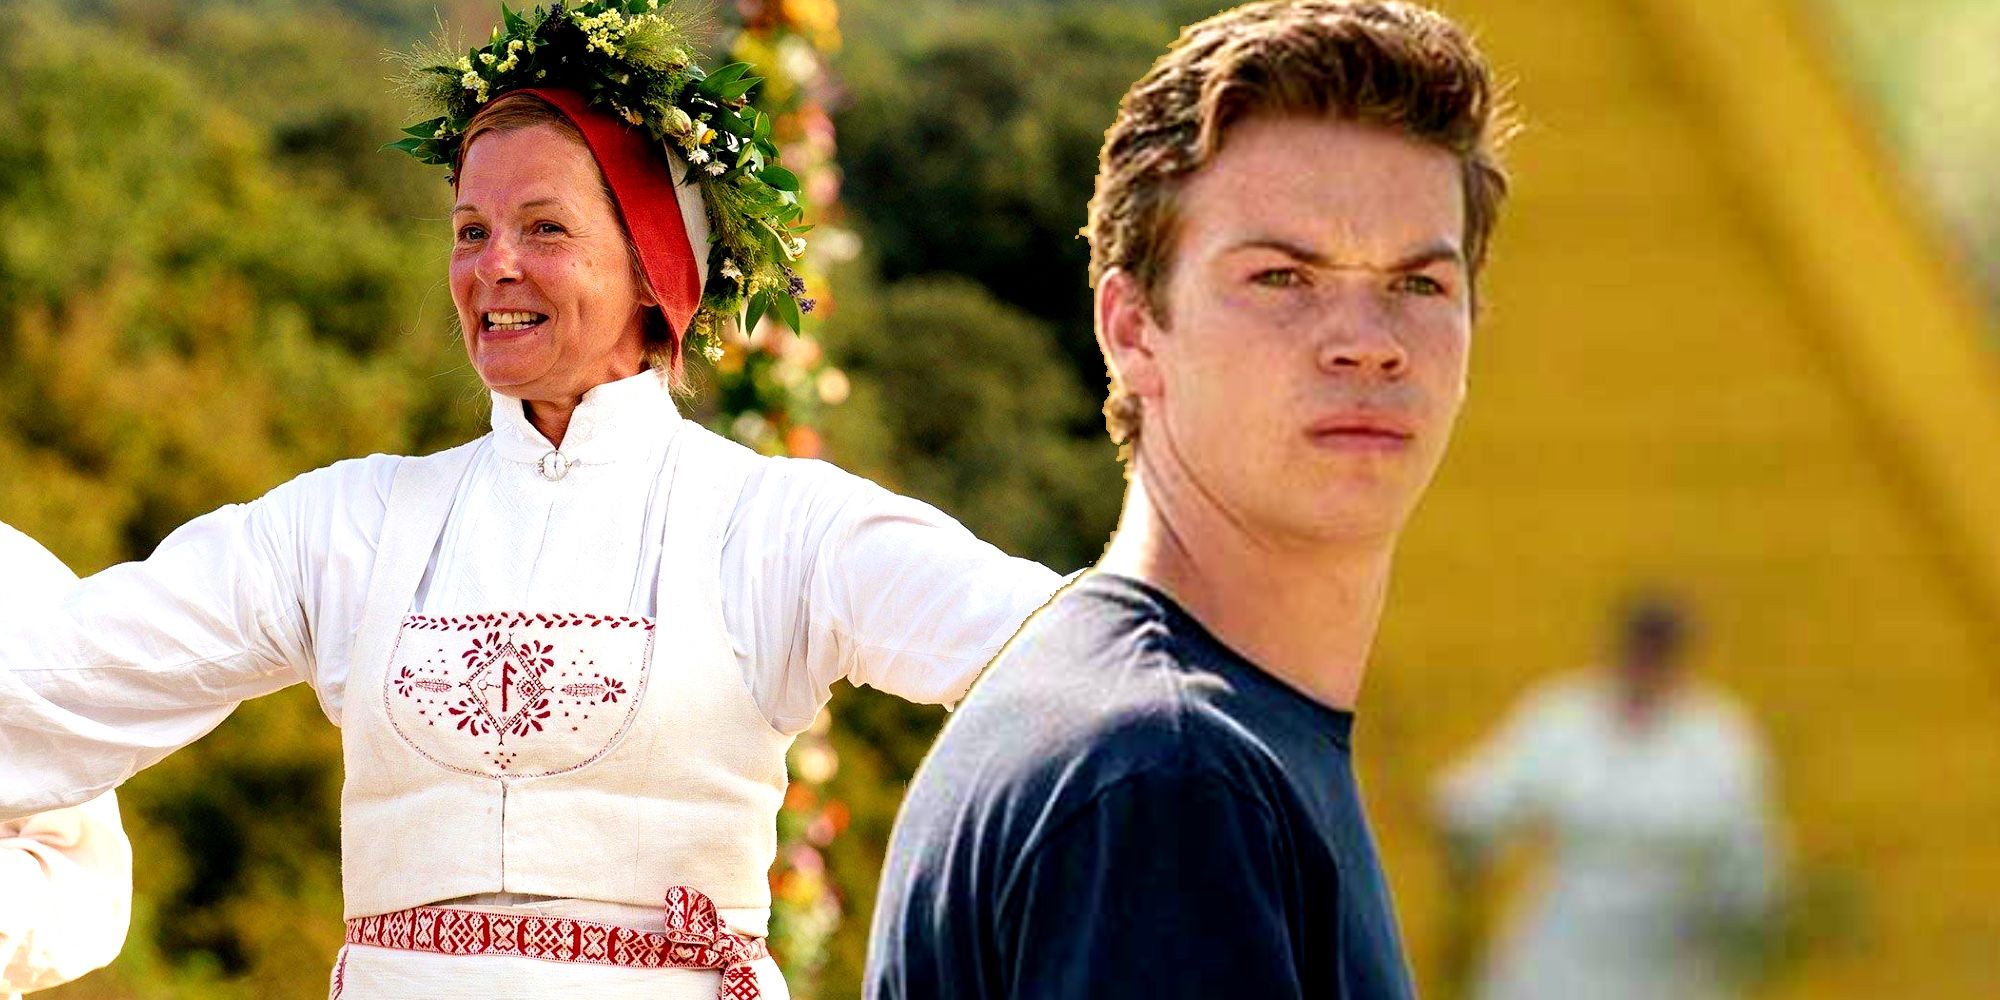 Midsommar Will Poulter as Mark